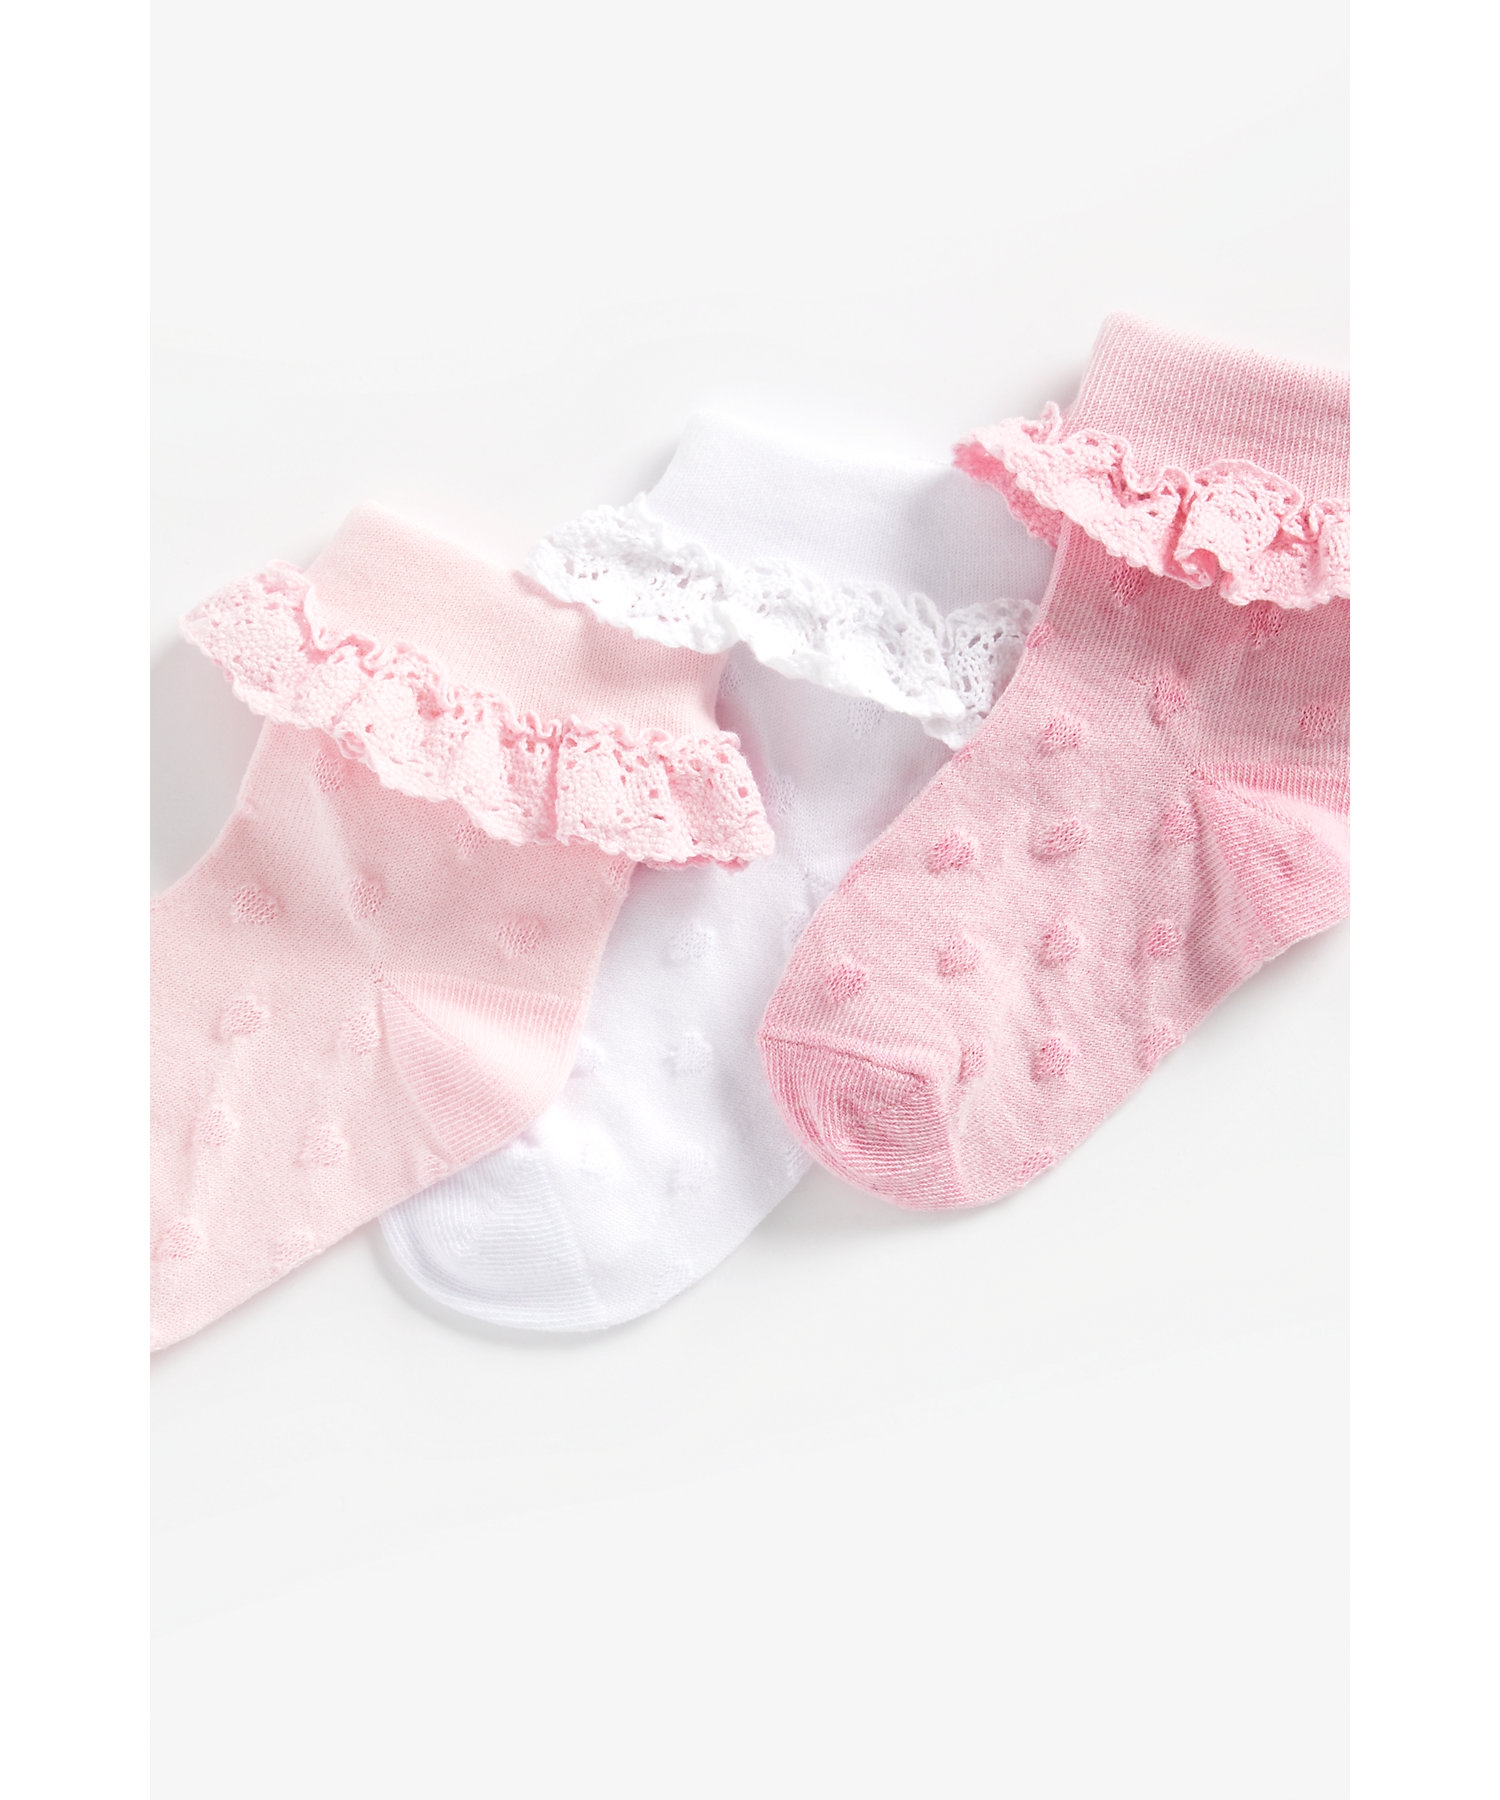 Mothercare | Girls Socks Frill Details - Pack Of 3 - Pink 1